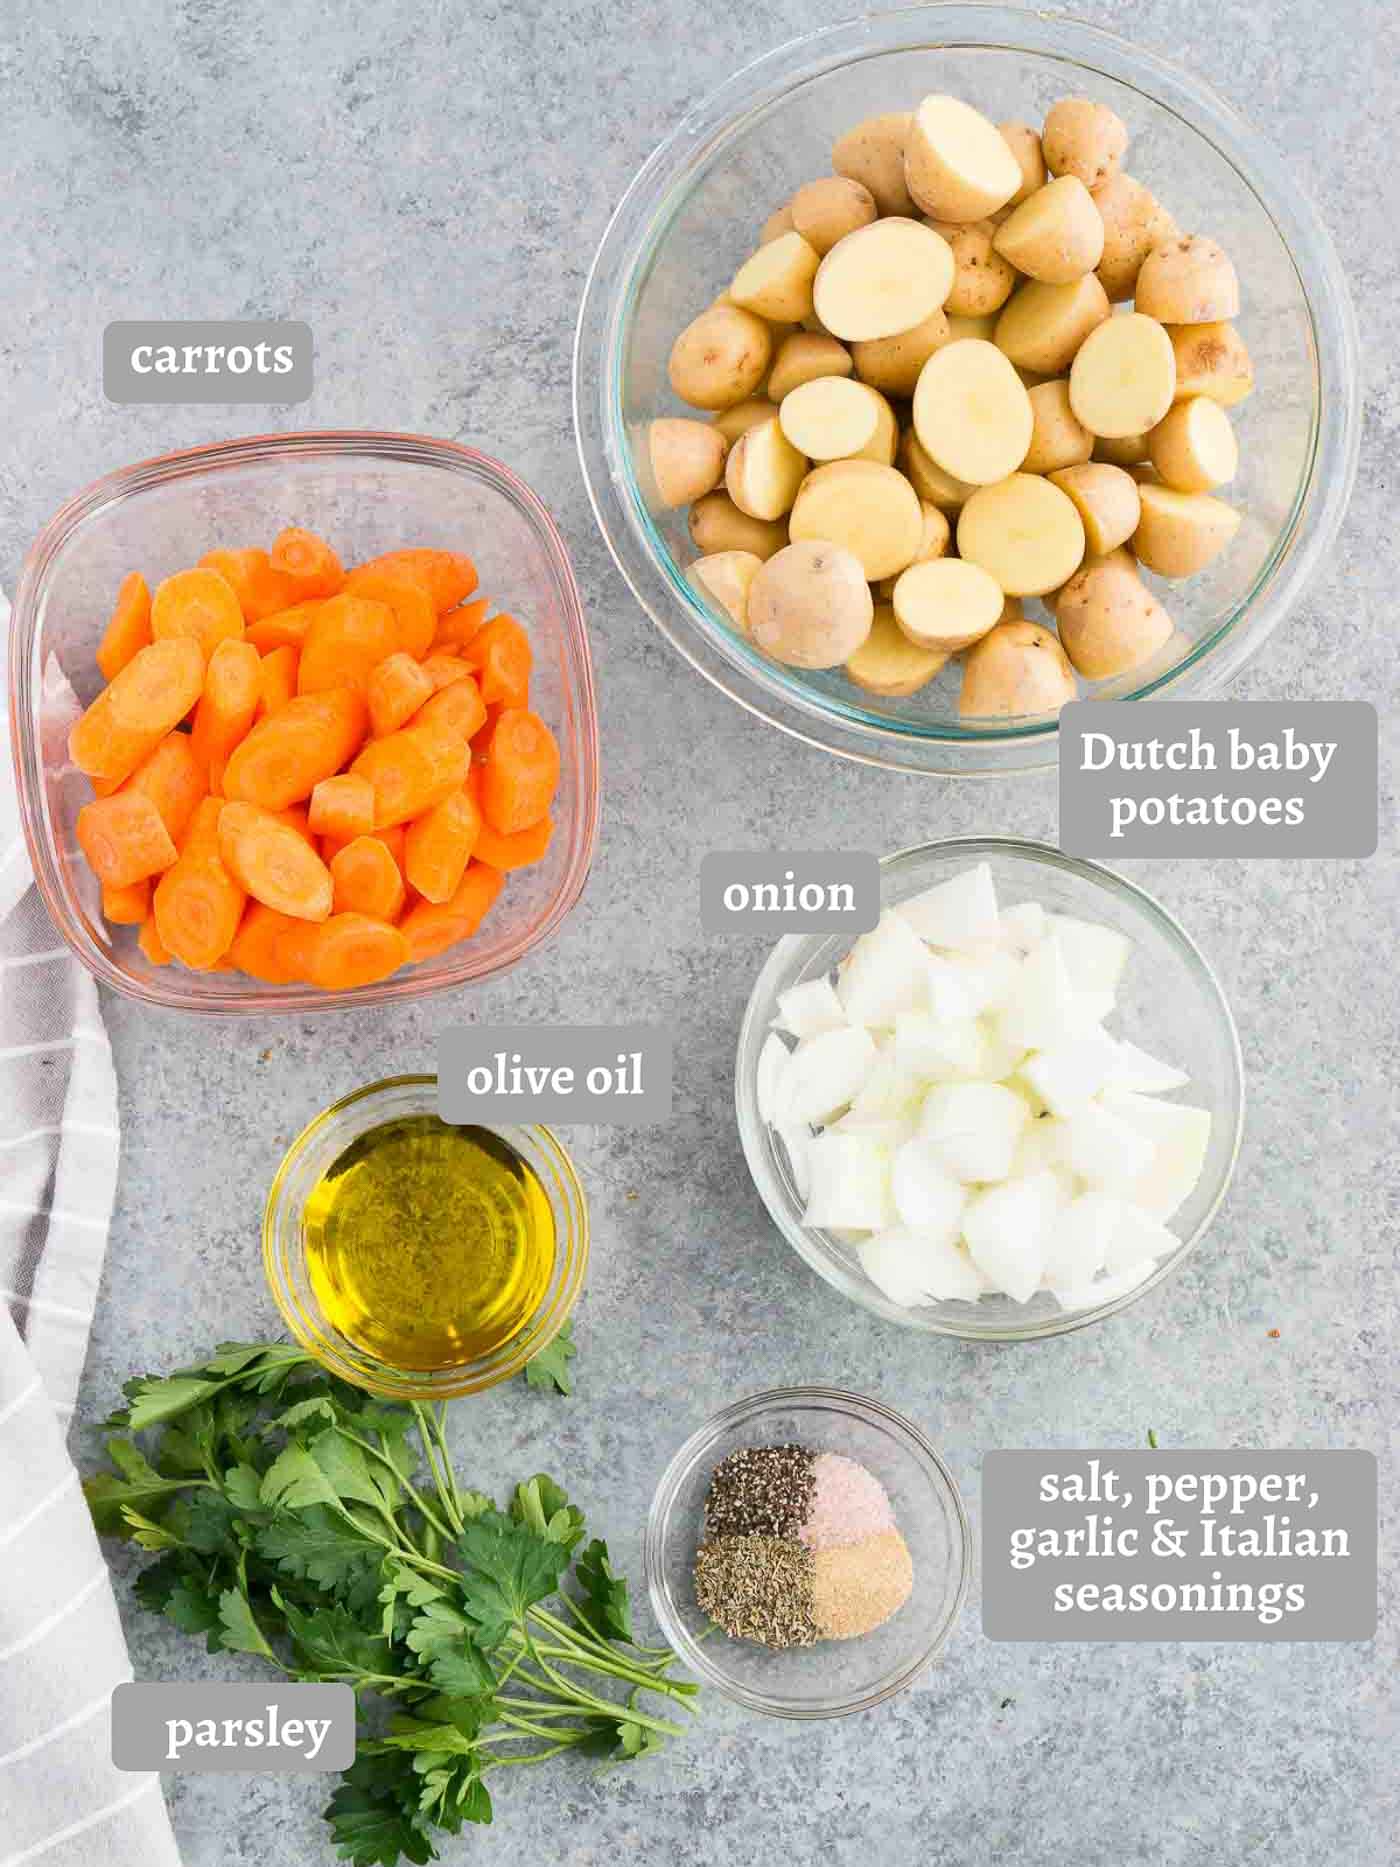 ingredients for oven roasted potatoes and carrots